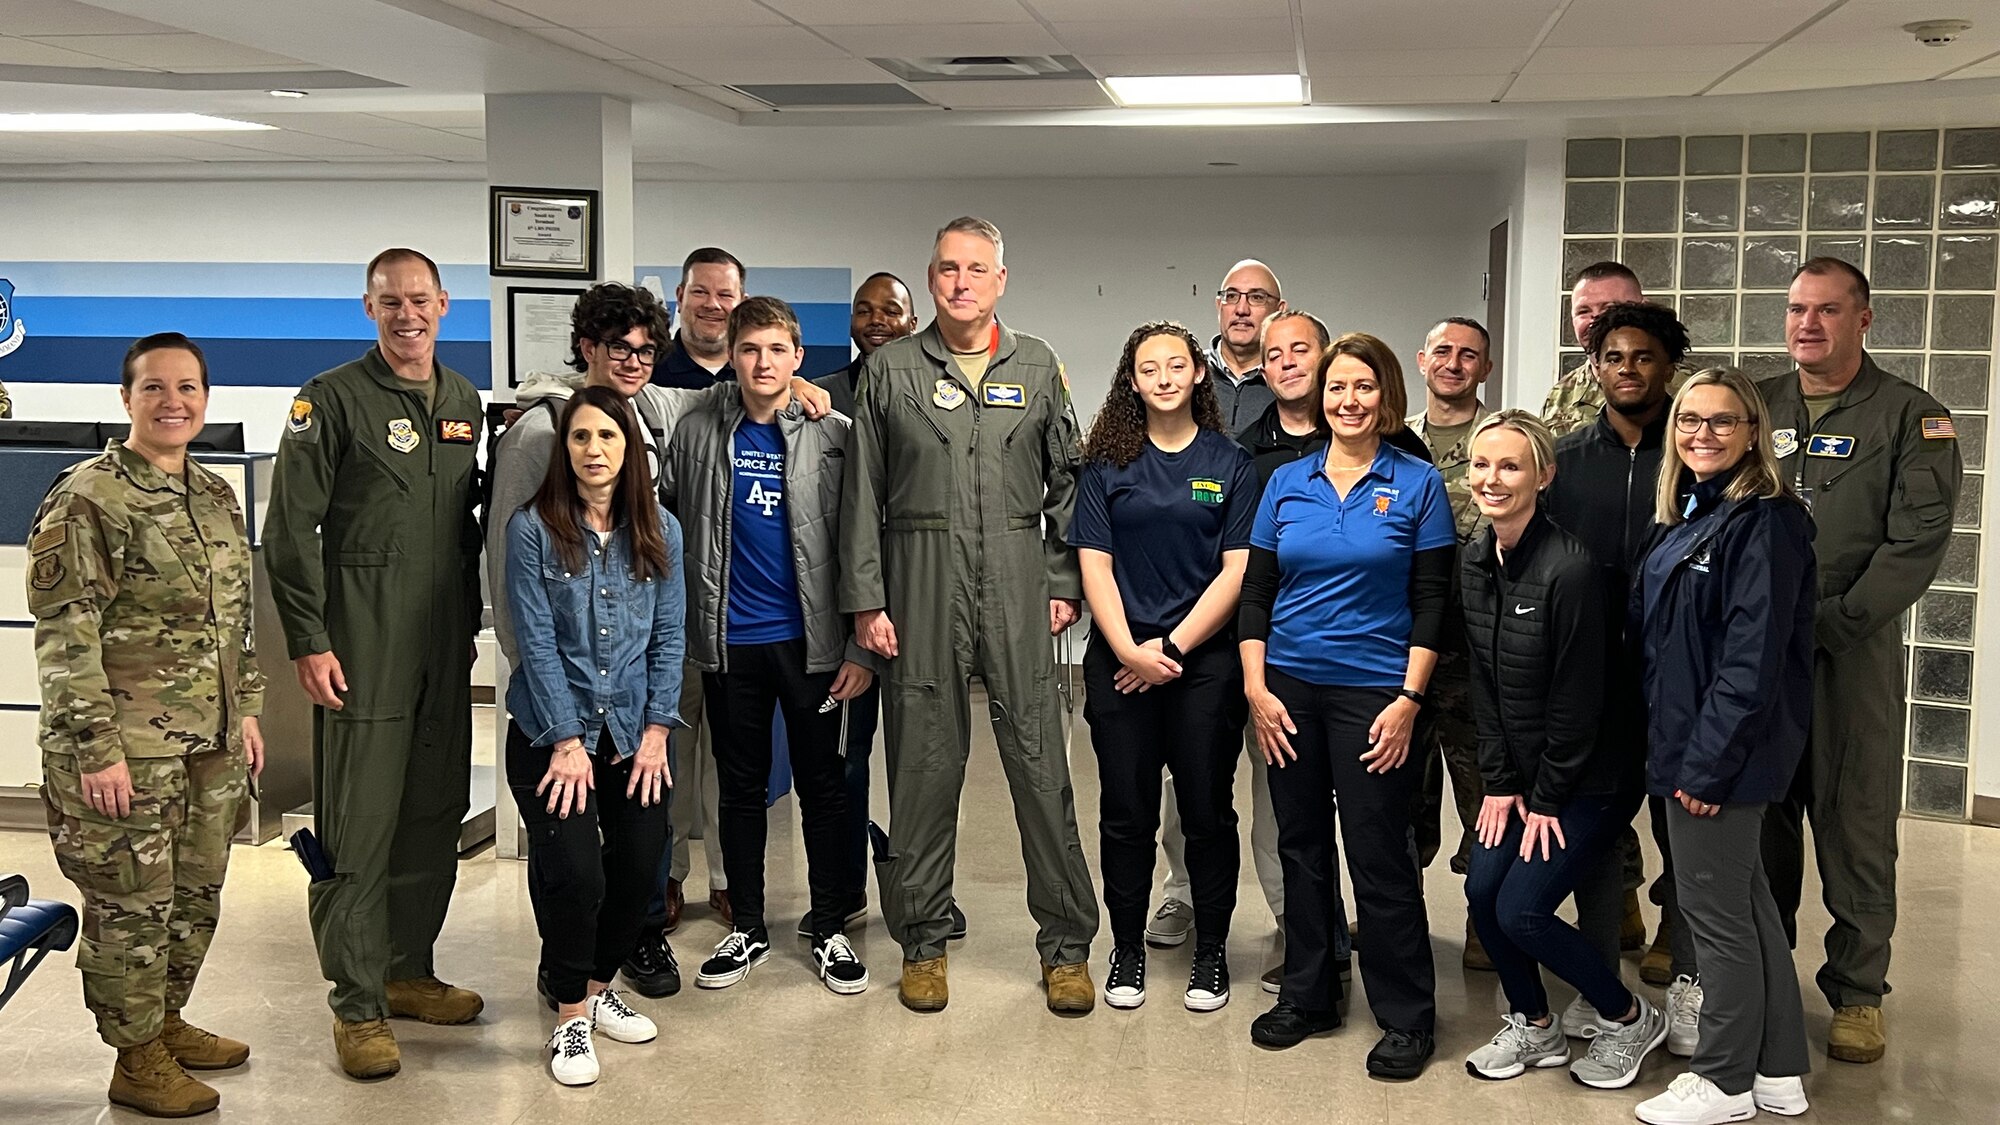 Students and administrators from the Hillsborough County School District (HCSD) pose for a photo with the command teams from Air Mobility Command, 18th Air Force and the 6th Air Refueling Wing, Dec. 9, 2021, at MacDill Air Force Base, Florida.